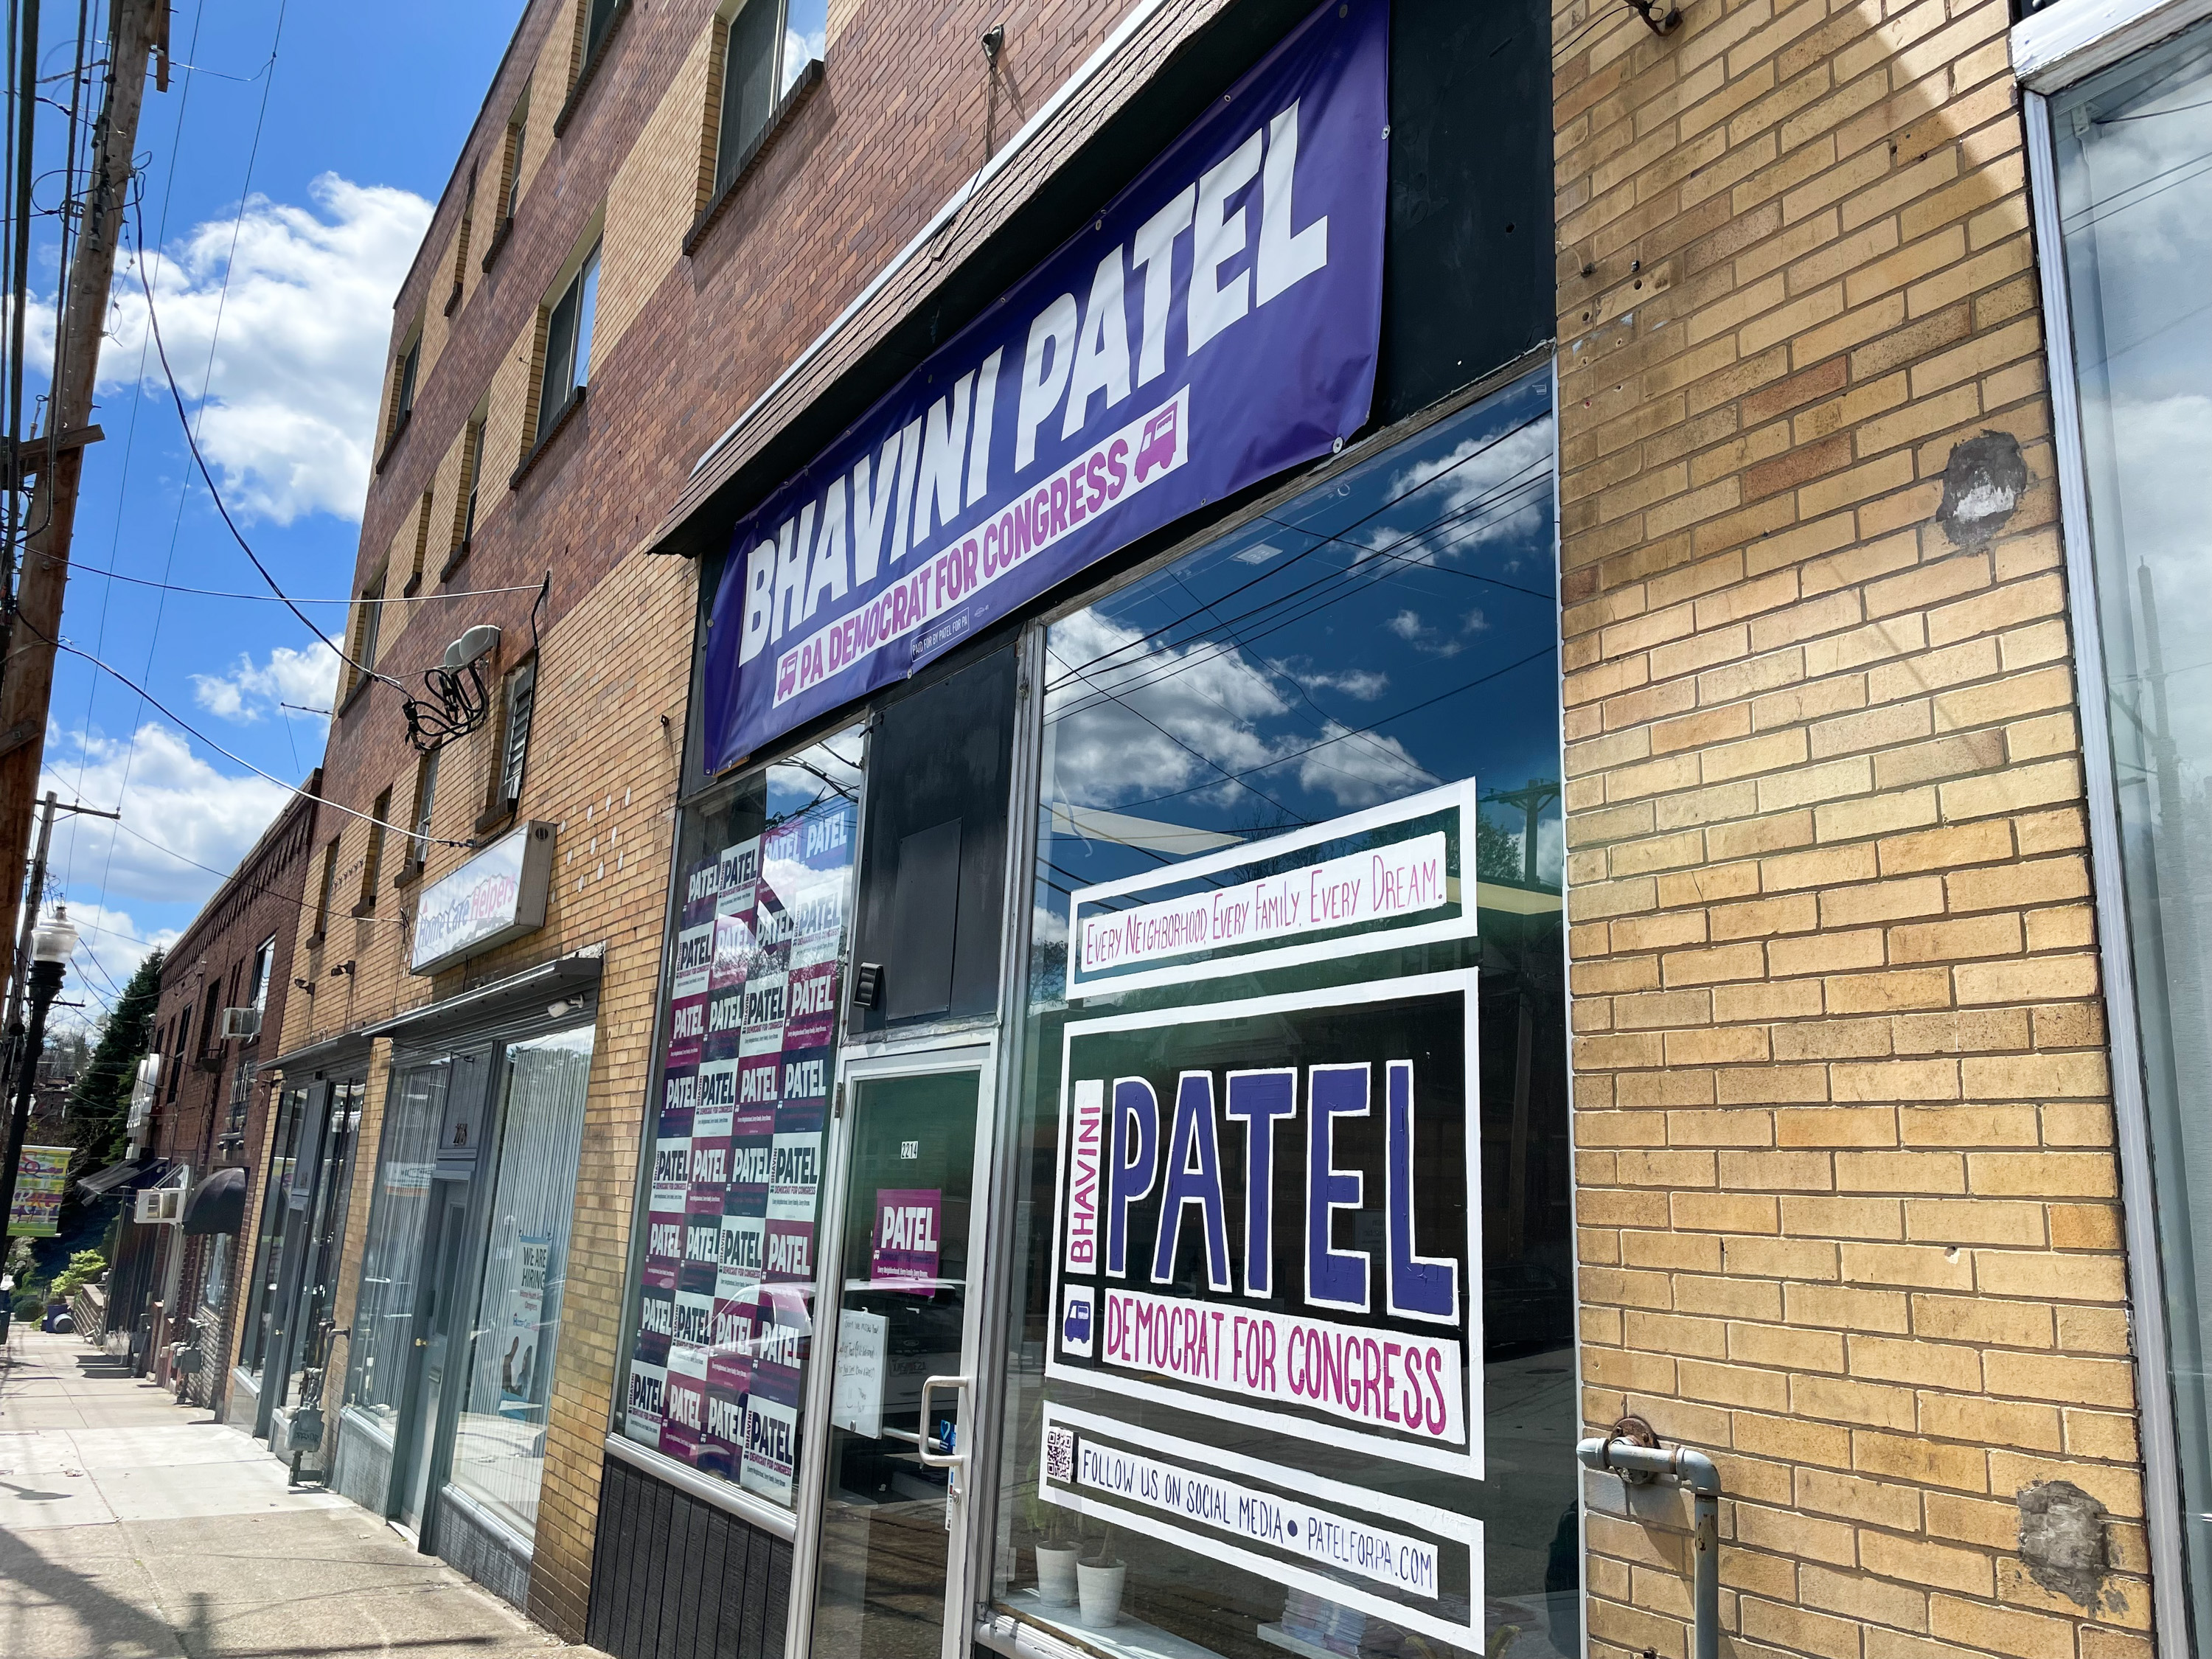 Patel is emboldened by the support she has seen in District 14, which includes Squirrel Hill, pointing to her endorsement from the district's independent Democratic club.